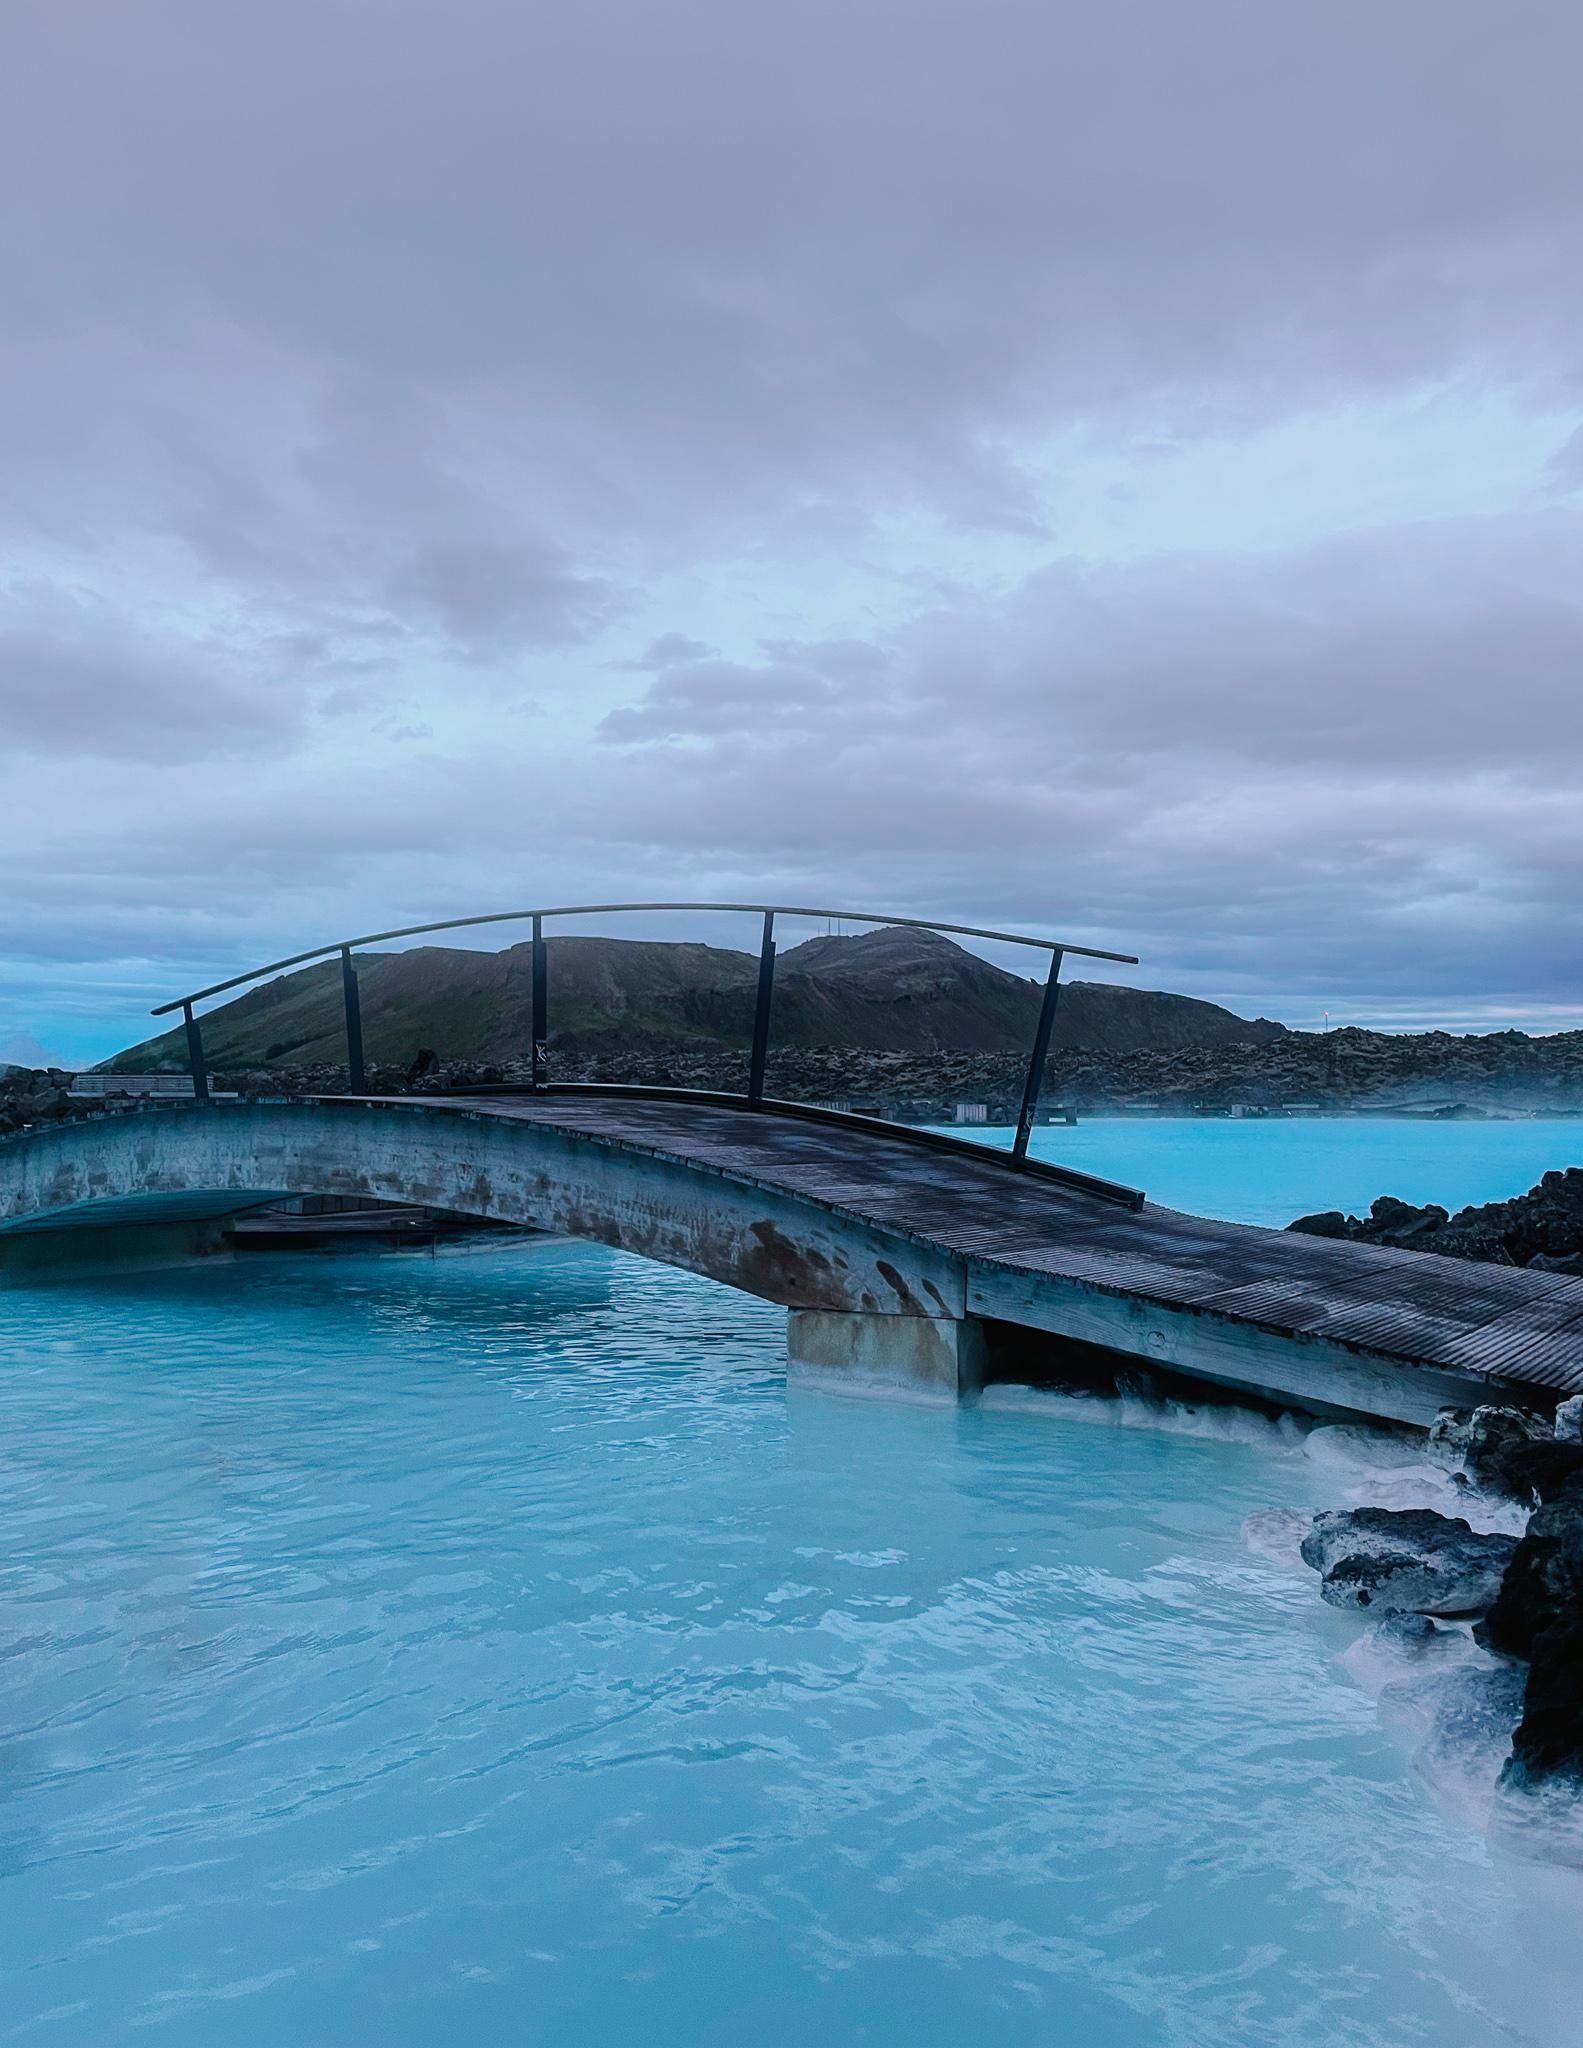 Blue Lagoon pool in Iceland and a wooden bridge.